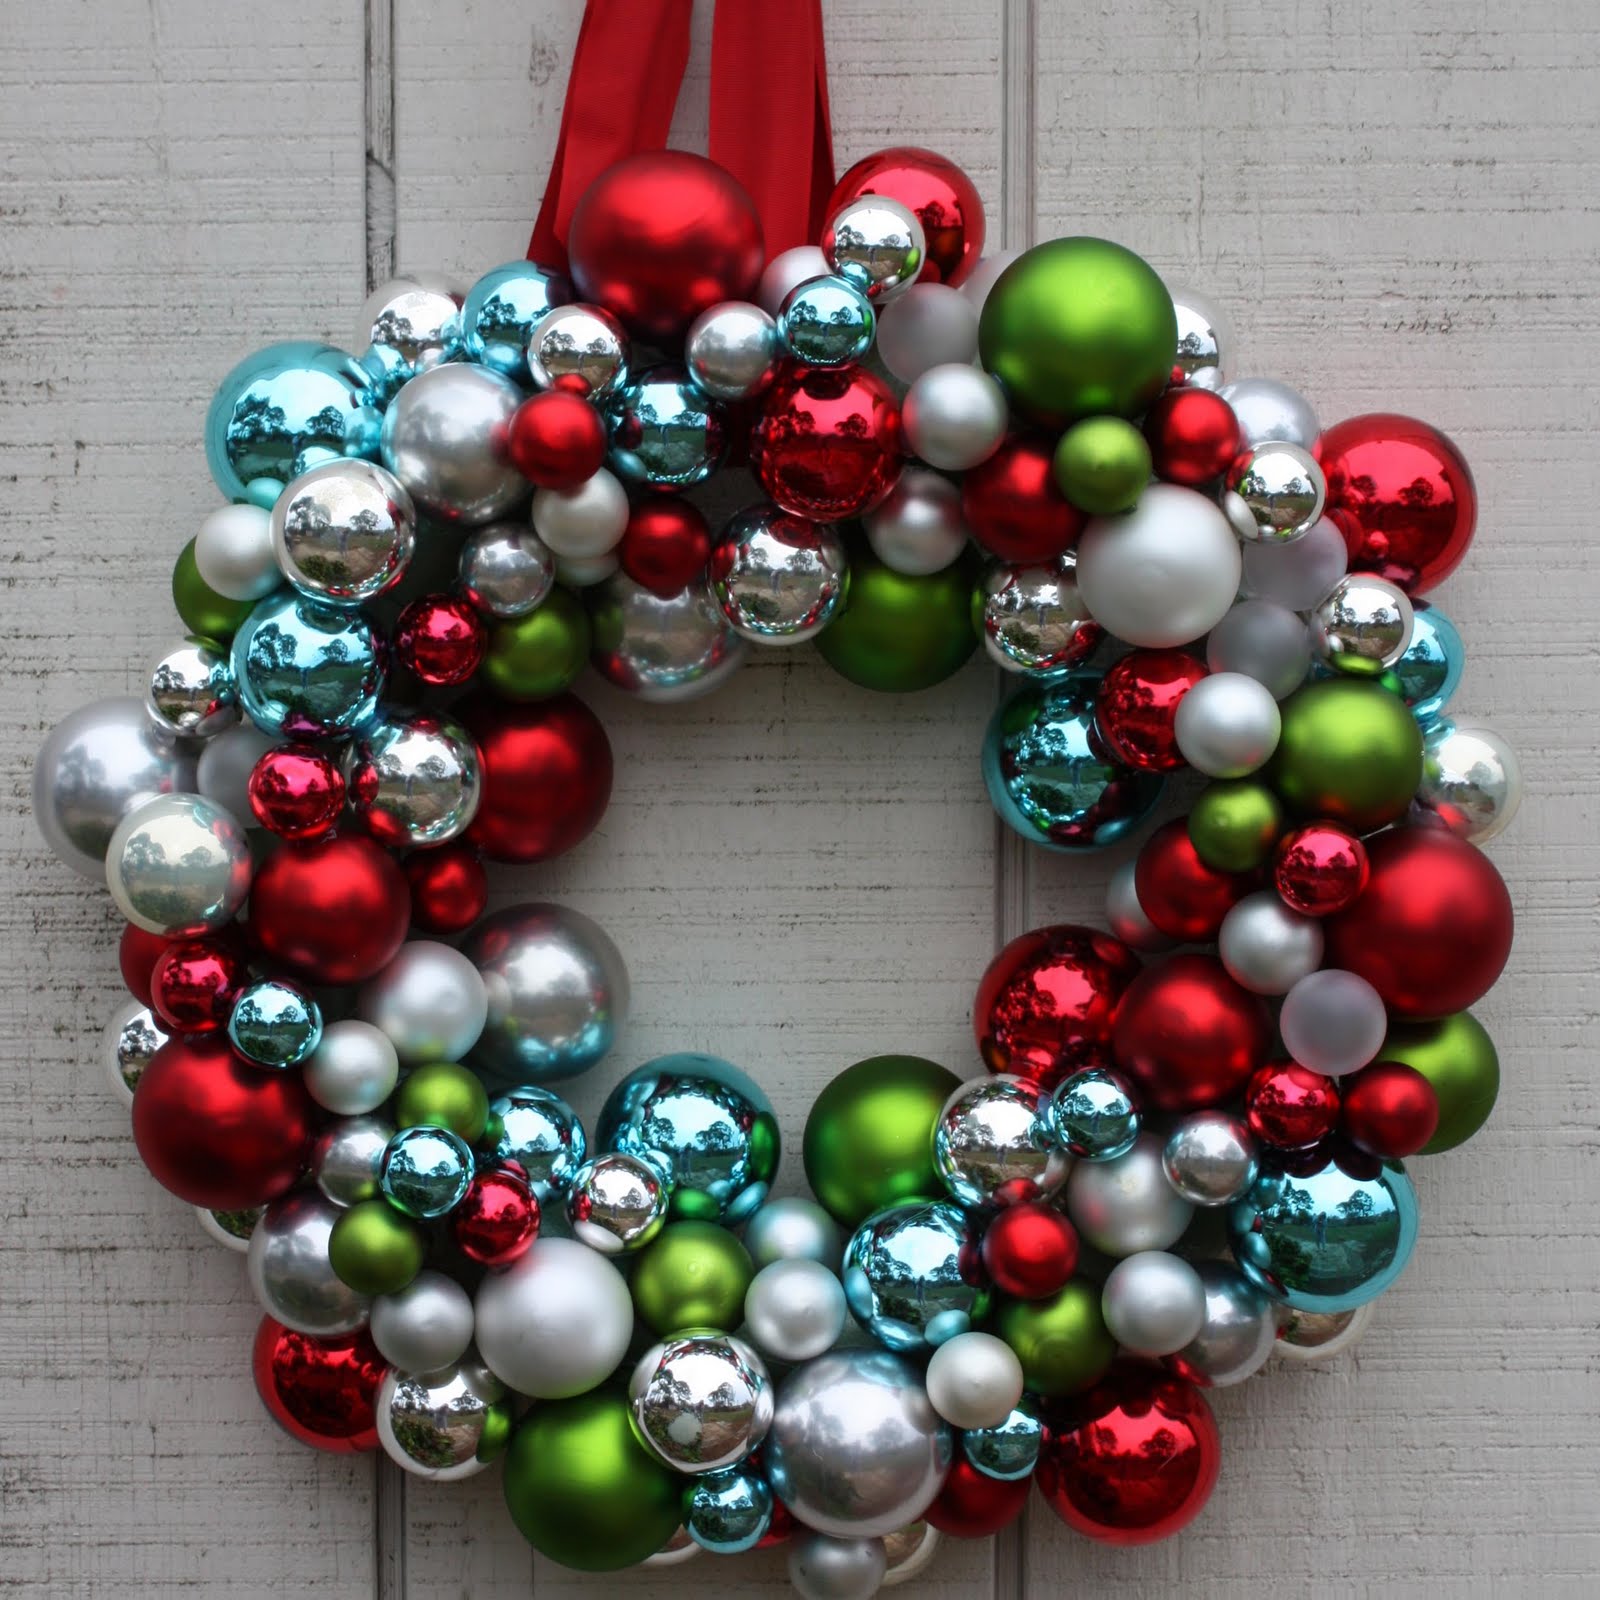 Christmas Ornament Wreath | 23 DIY Holiday Decor Ideas to Deck the Halls With This Season ...